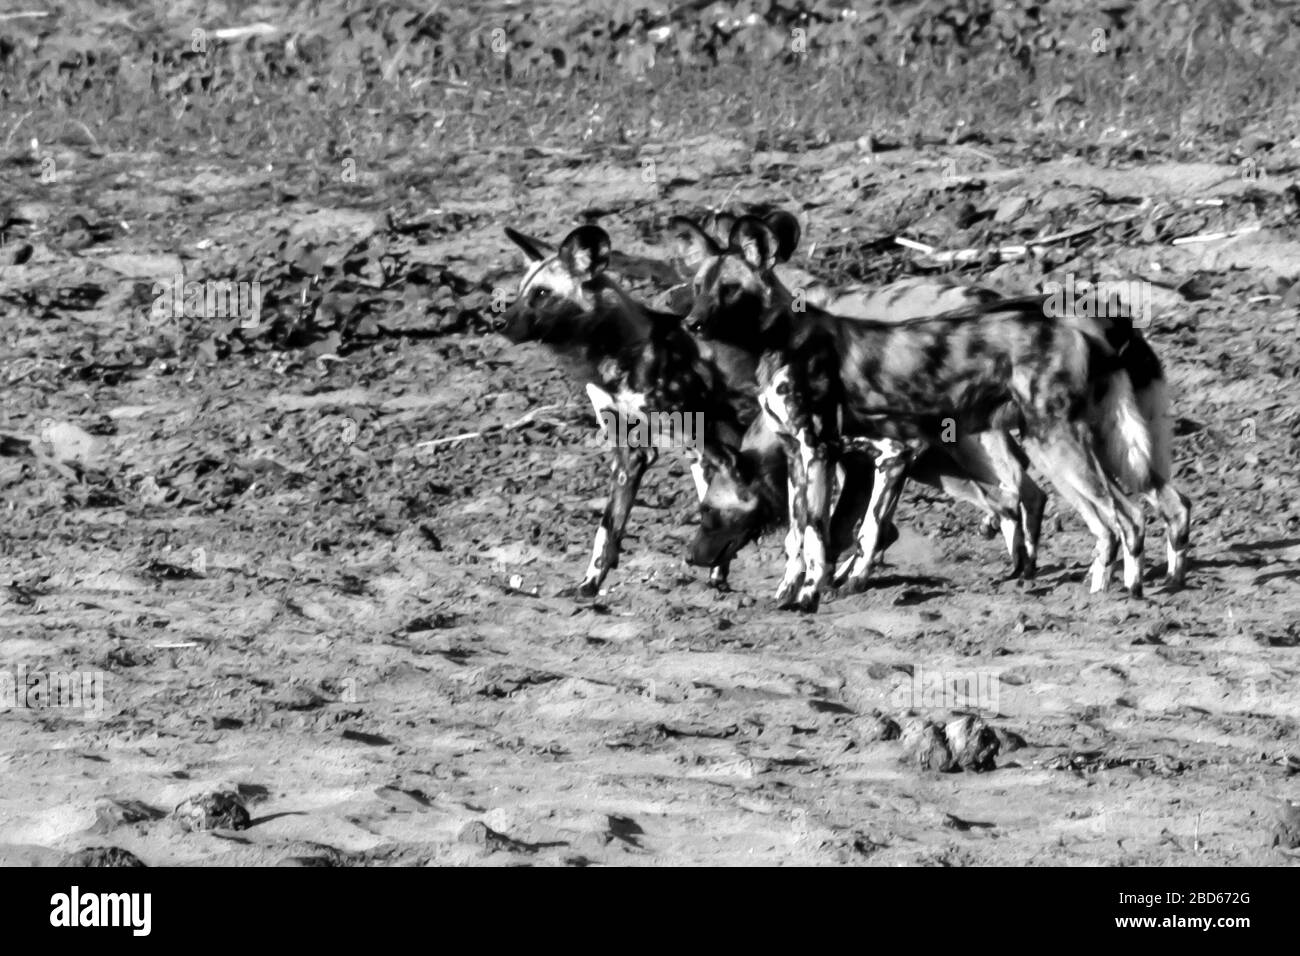 A small pack of African painted wolfs, Lycaon pictus, on the banks of the Olifants River, Kruger National Park, South Africa in Monochrome Stock Photo